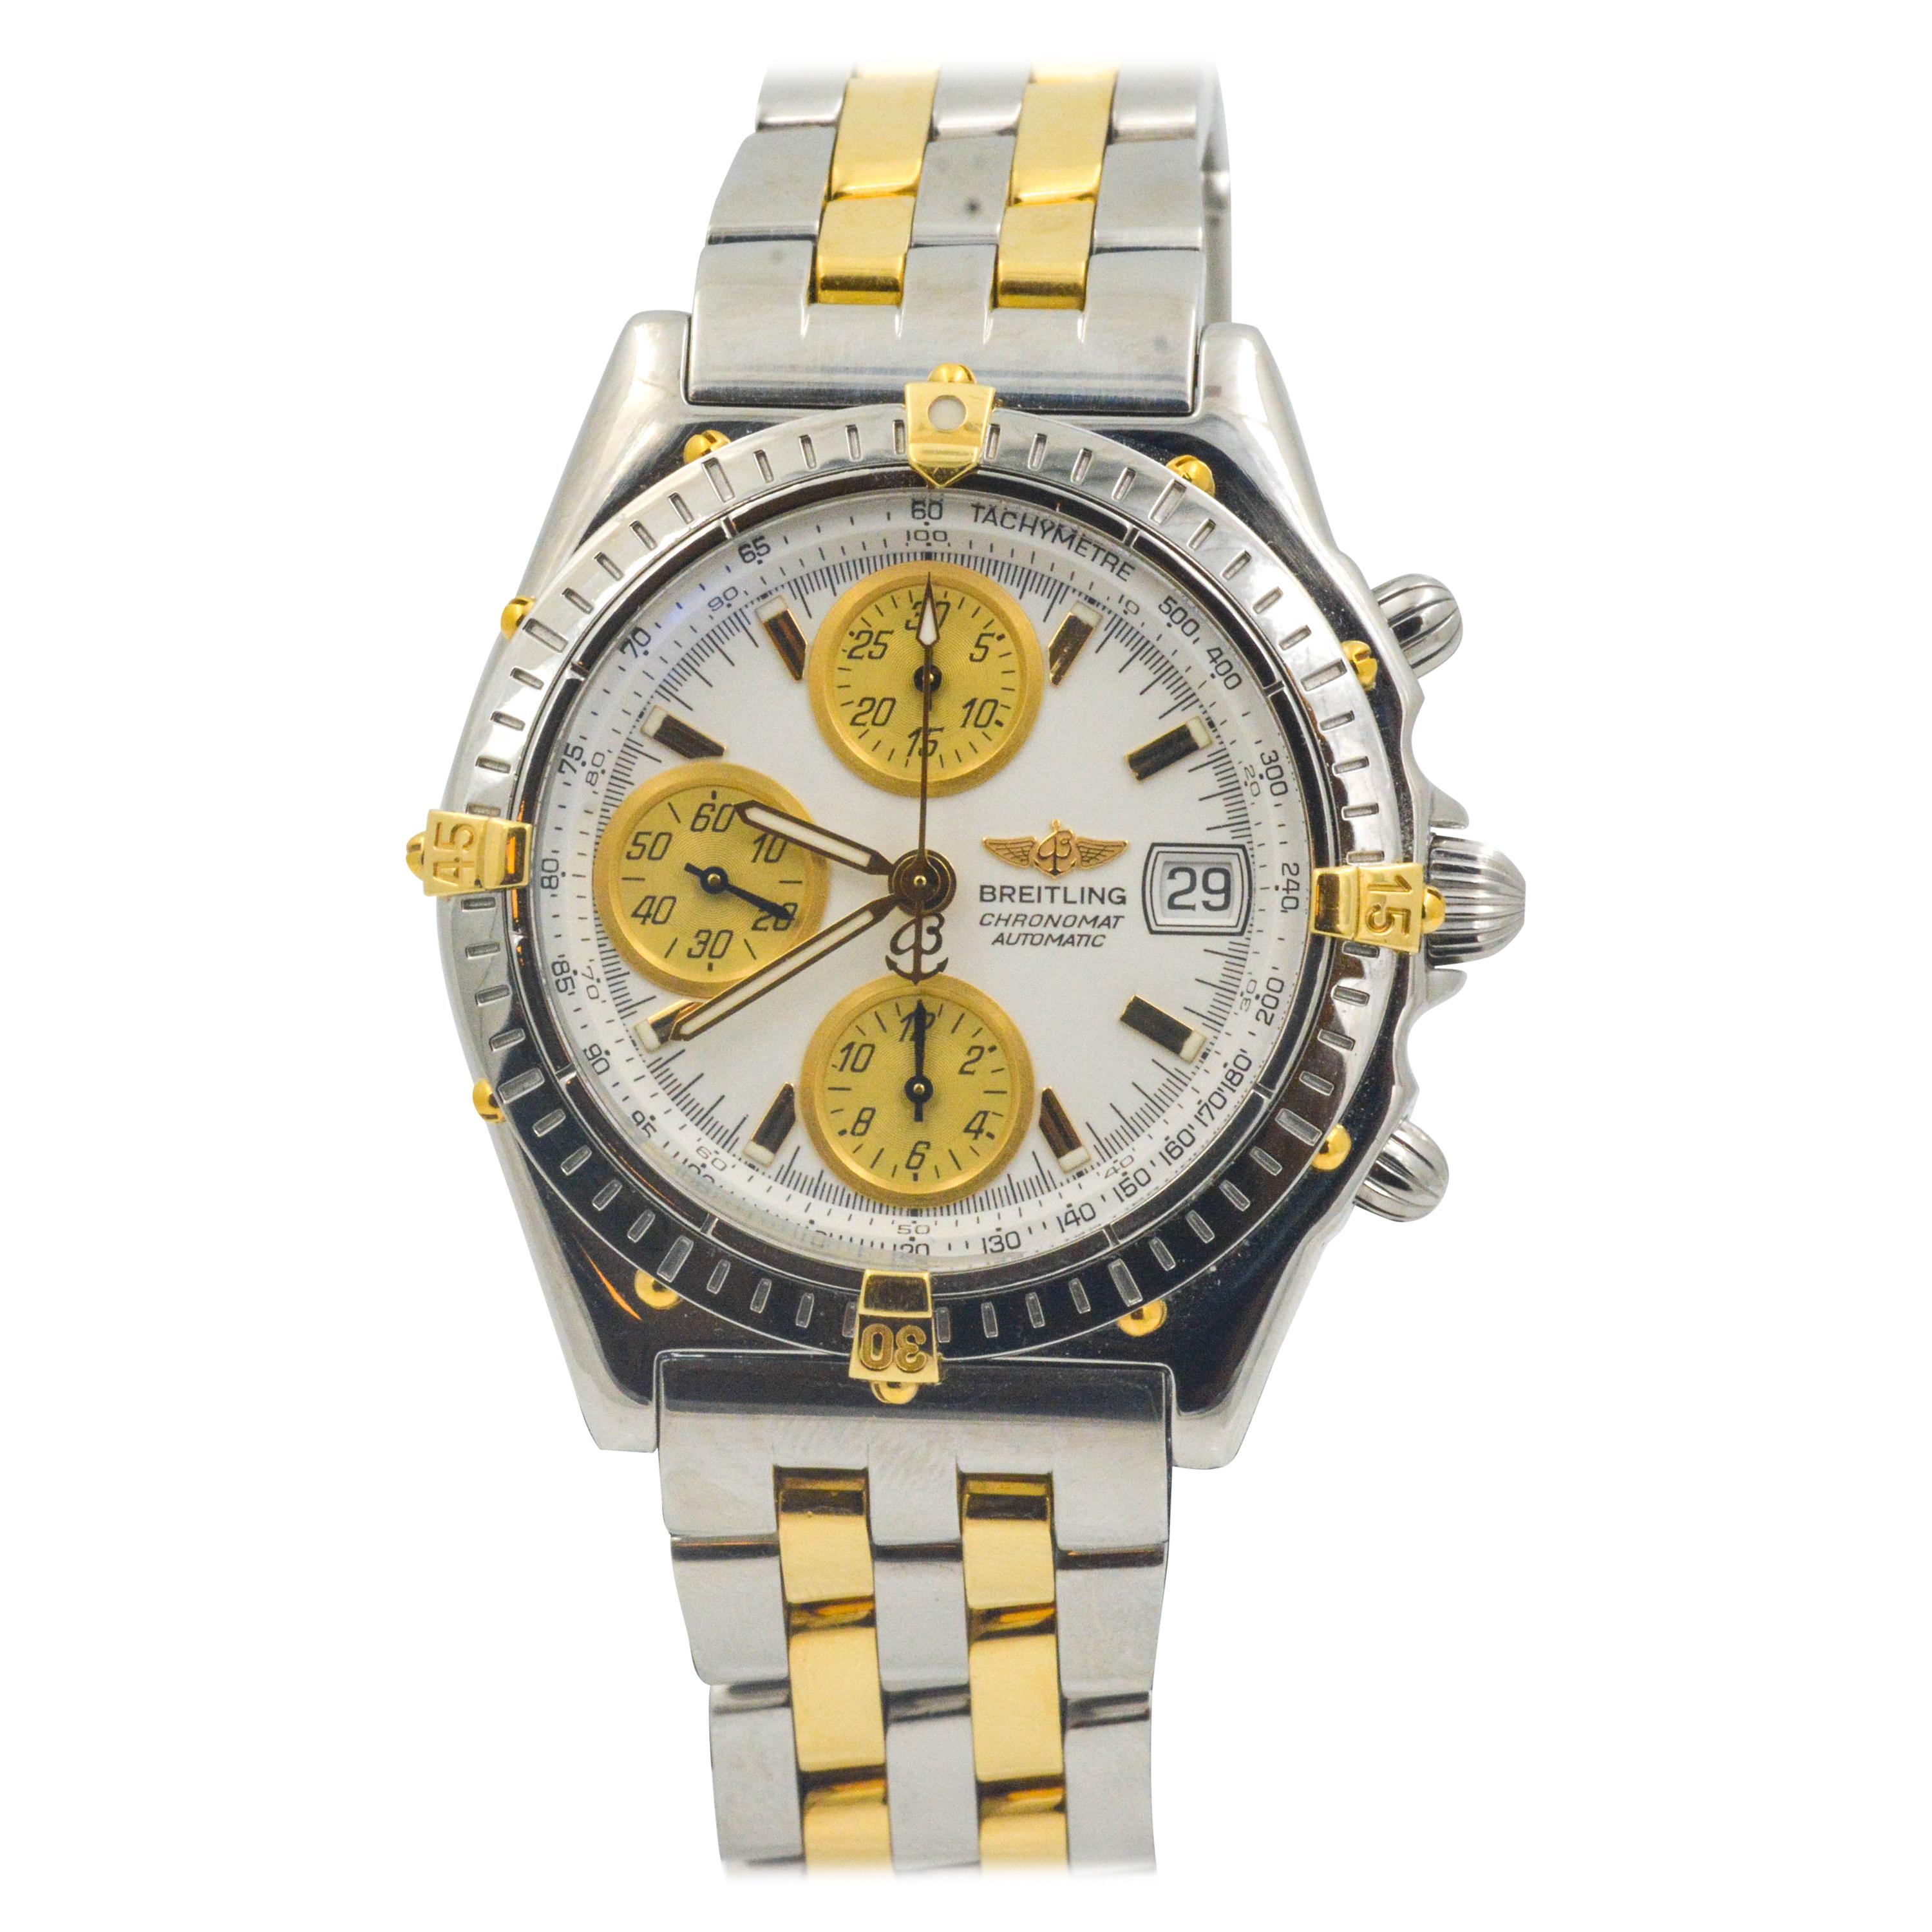 Breitling Chronomat Stainless Steel and 18 Karat Yellow Gold Watch